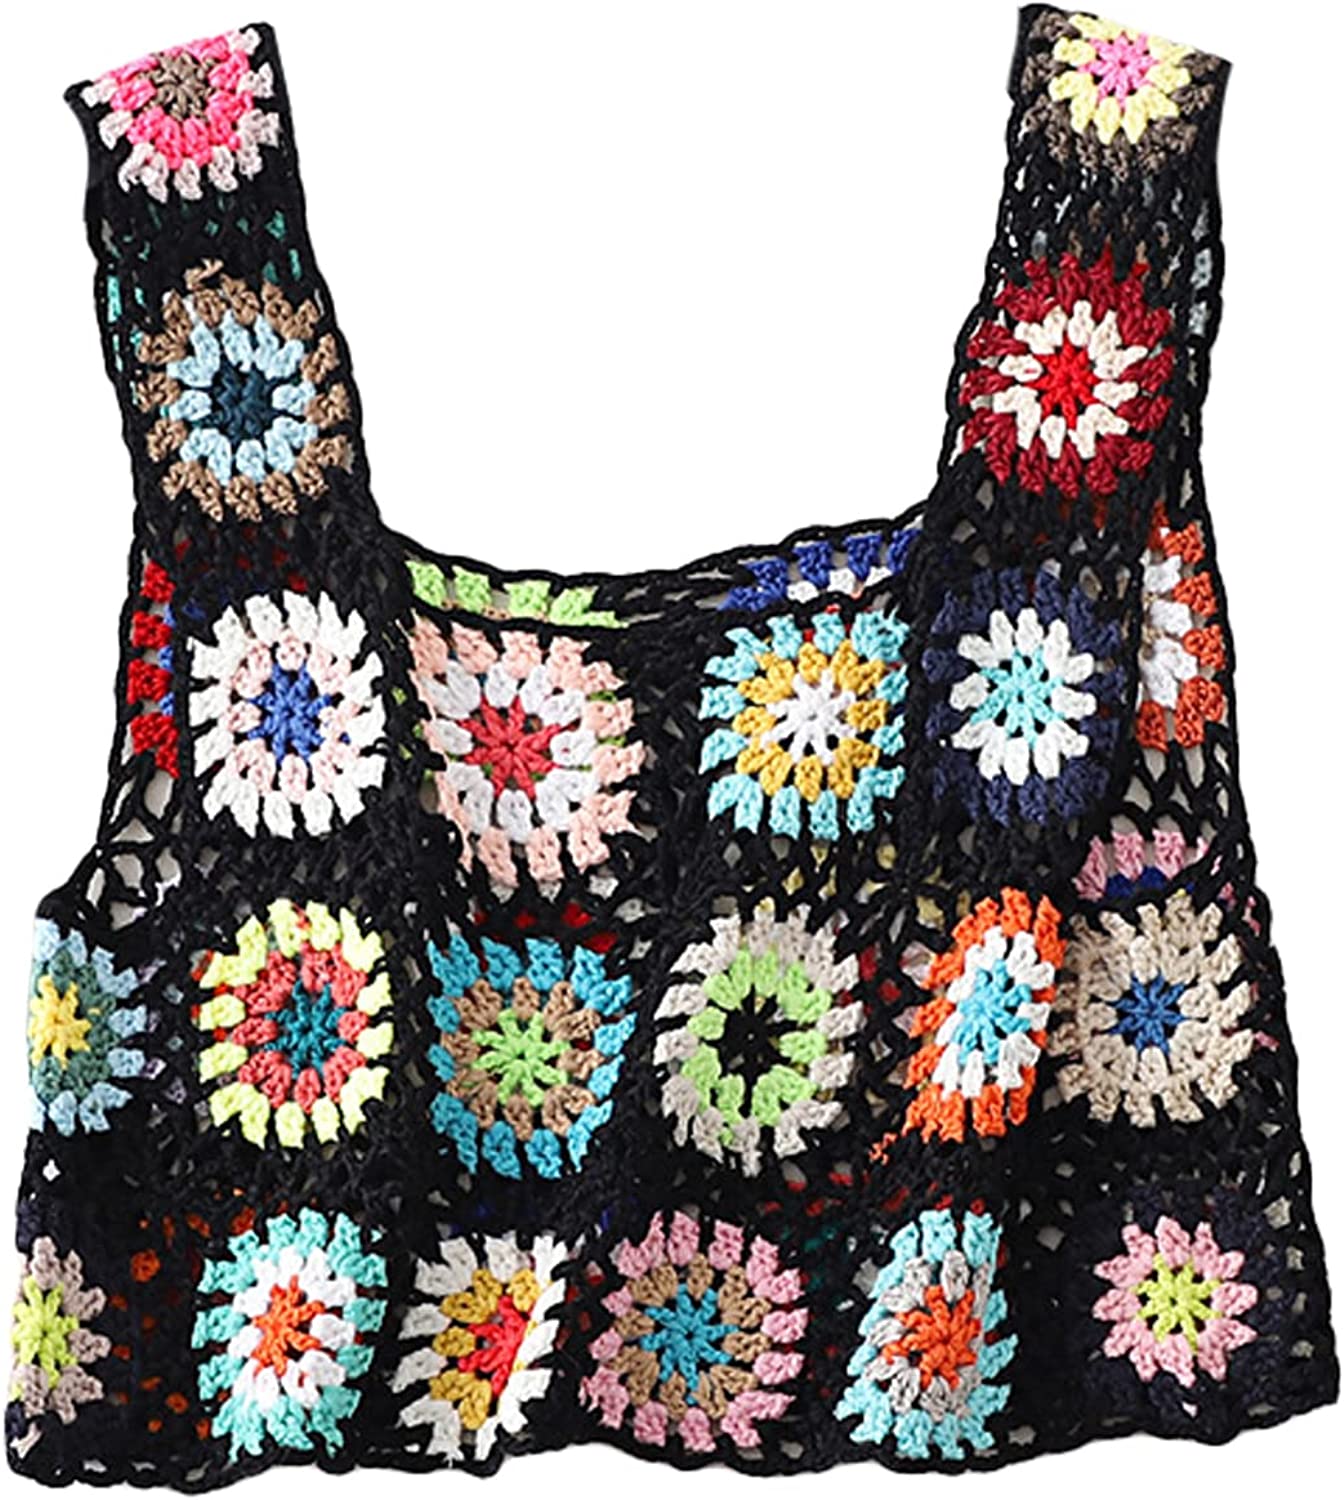 Women's Summer Crochet Tank Top Colorful Floral Embroidery Knit